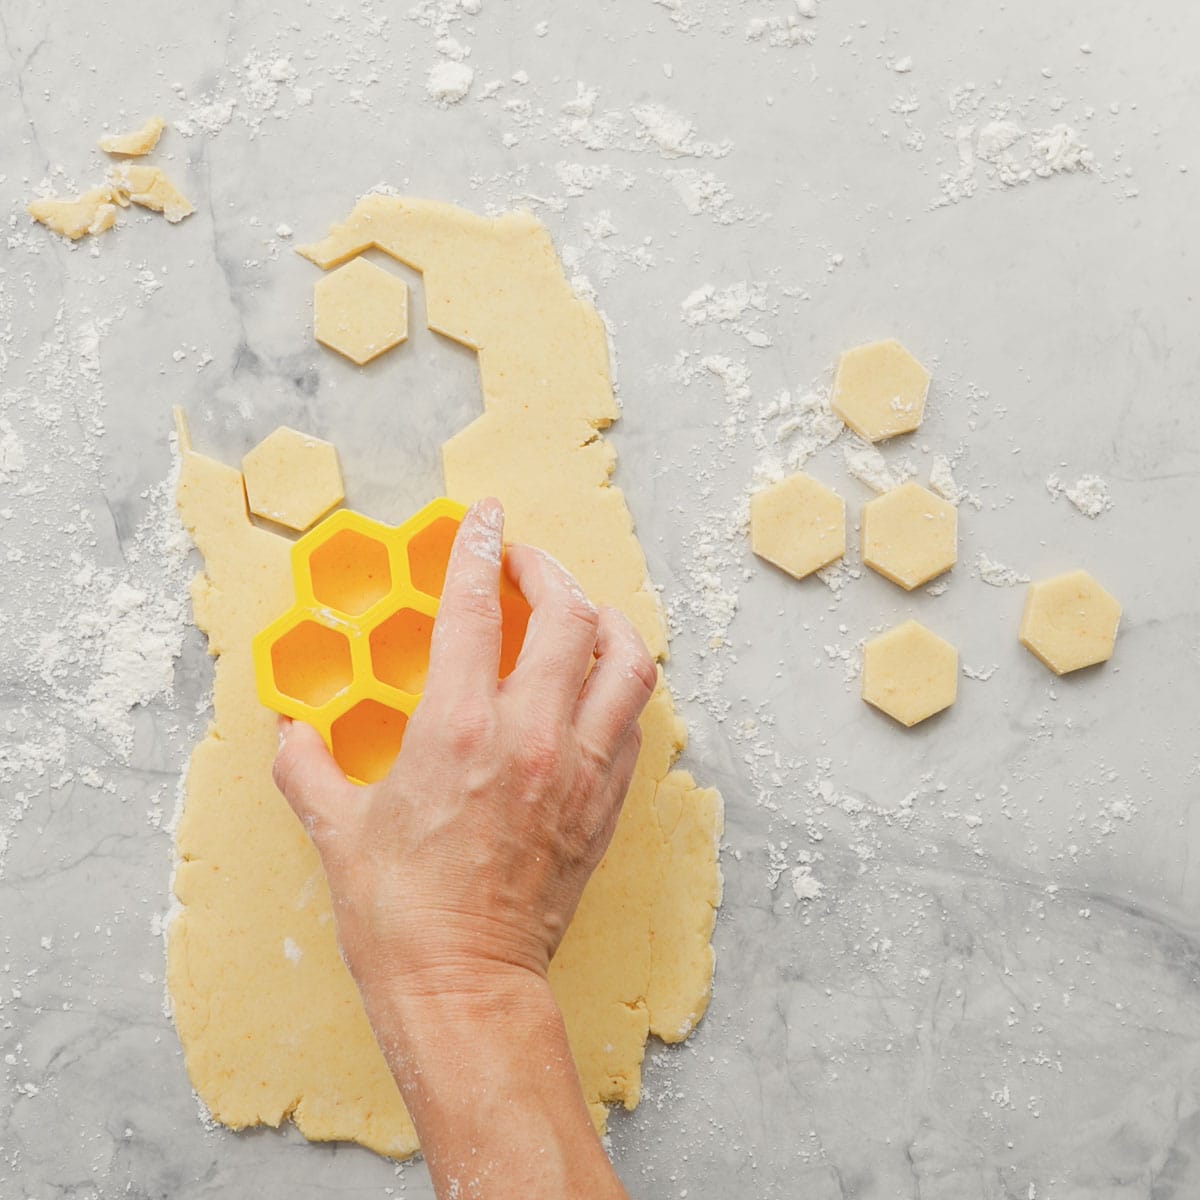 Rolled out dough on a floured surface, with a hand pressing a cutter into it to create small hexagons.  